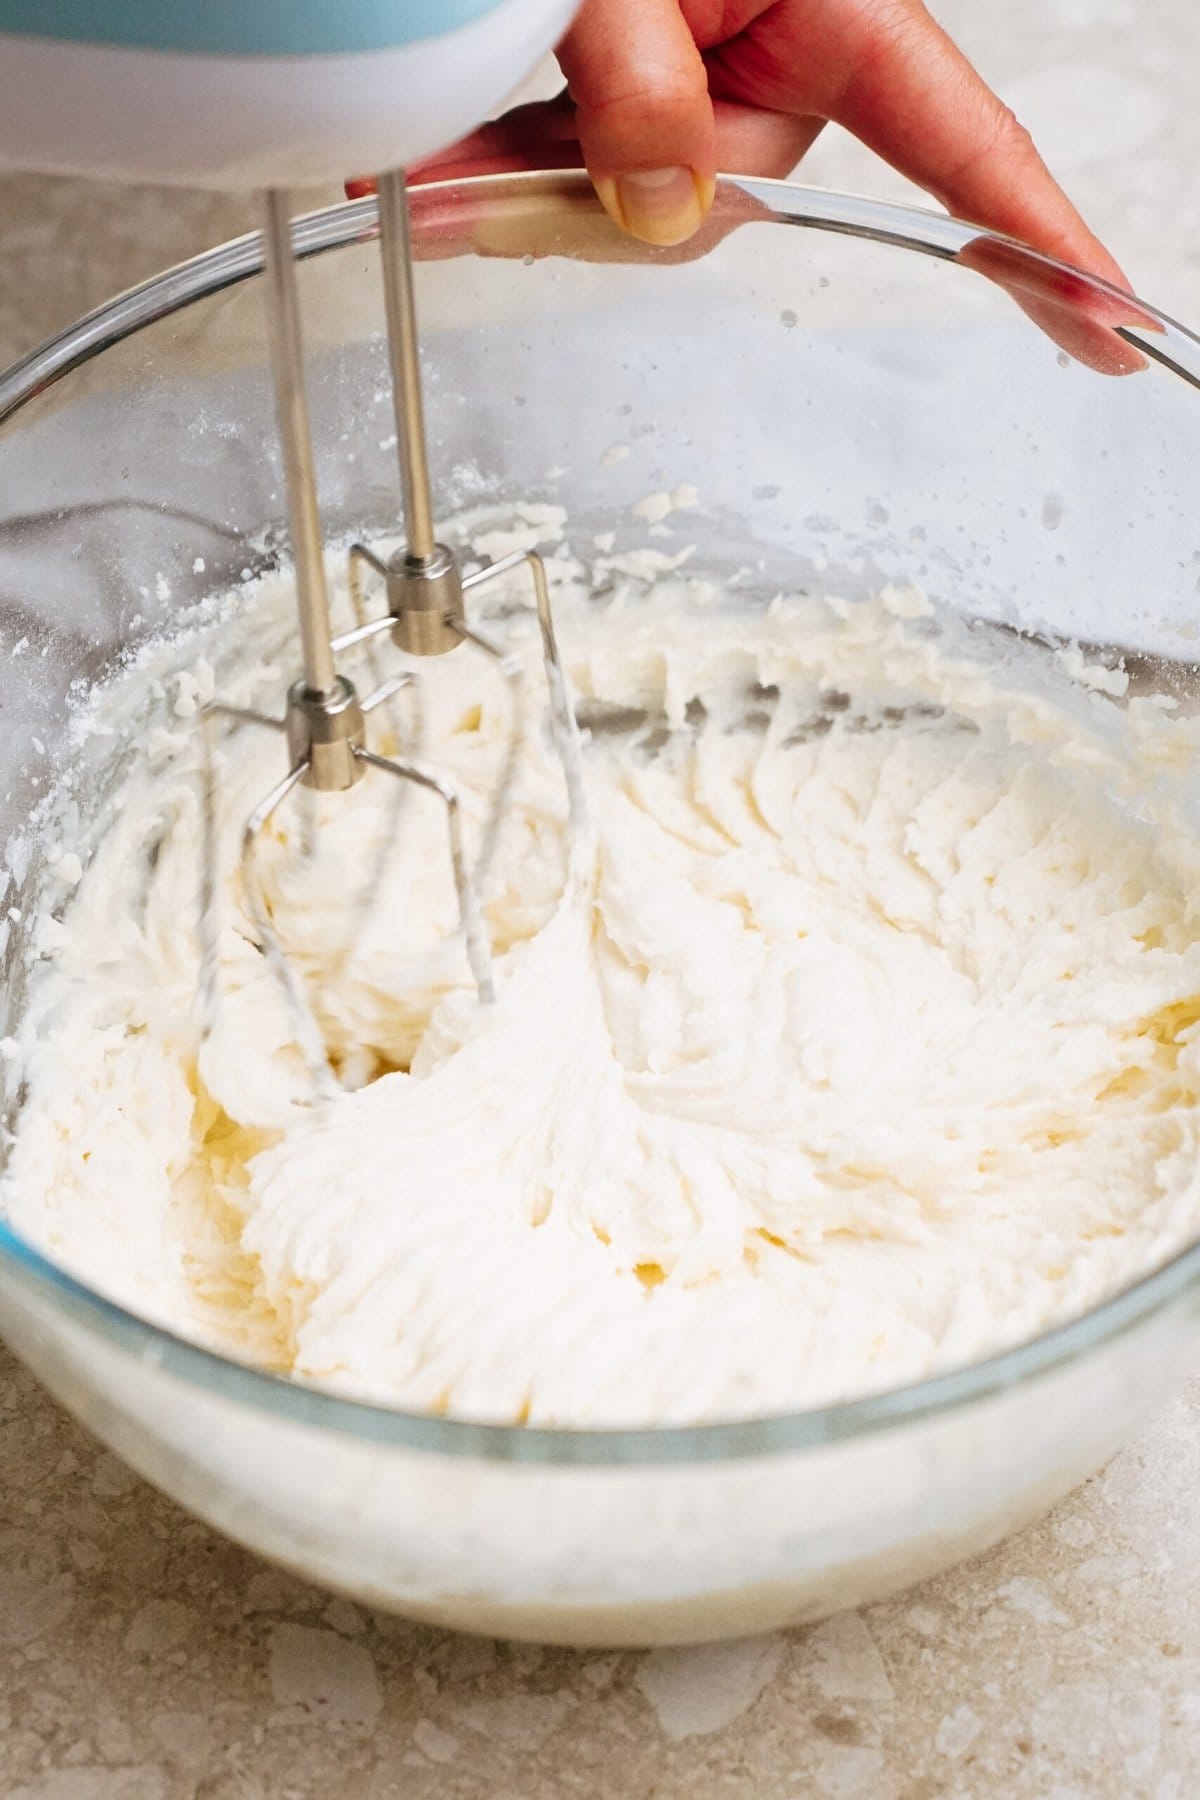 A hand holds a mixer blending a thick, creamy substance in a clear glass bowl.